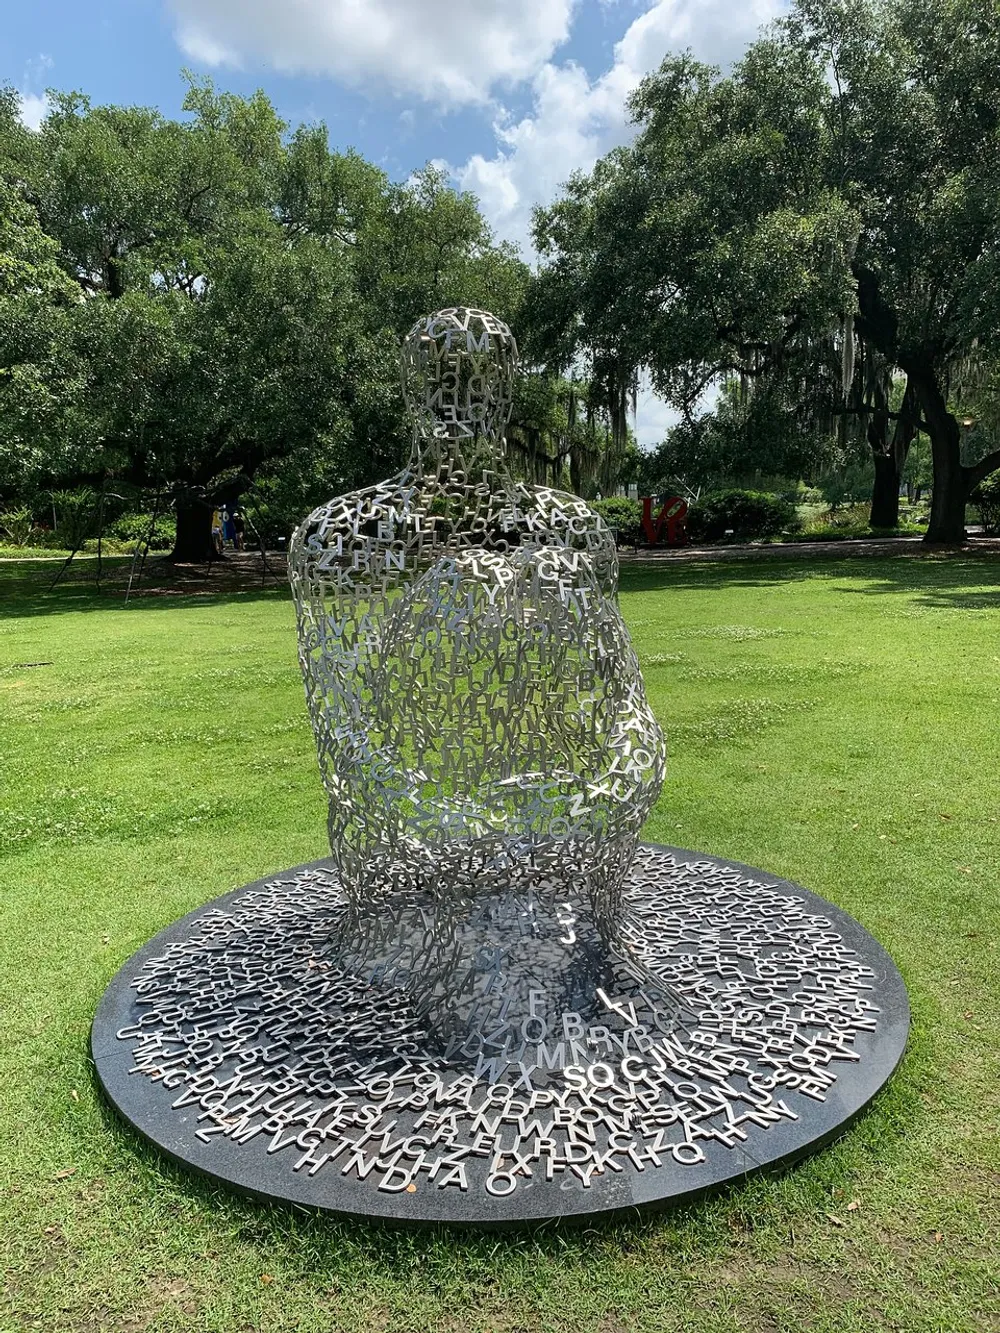 The image shows a unique outdoor sculpture of a seated human figure made of interconnected metal letters placed on a lush green lawn with trees in the background